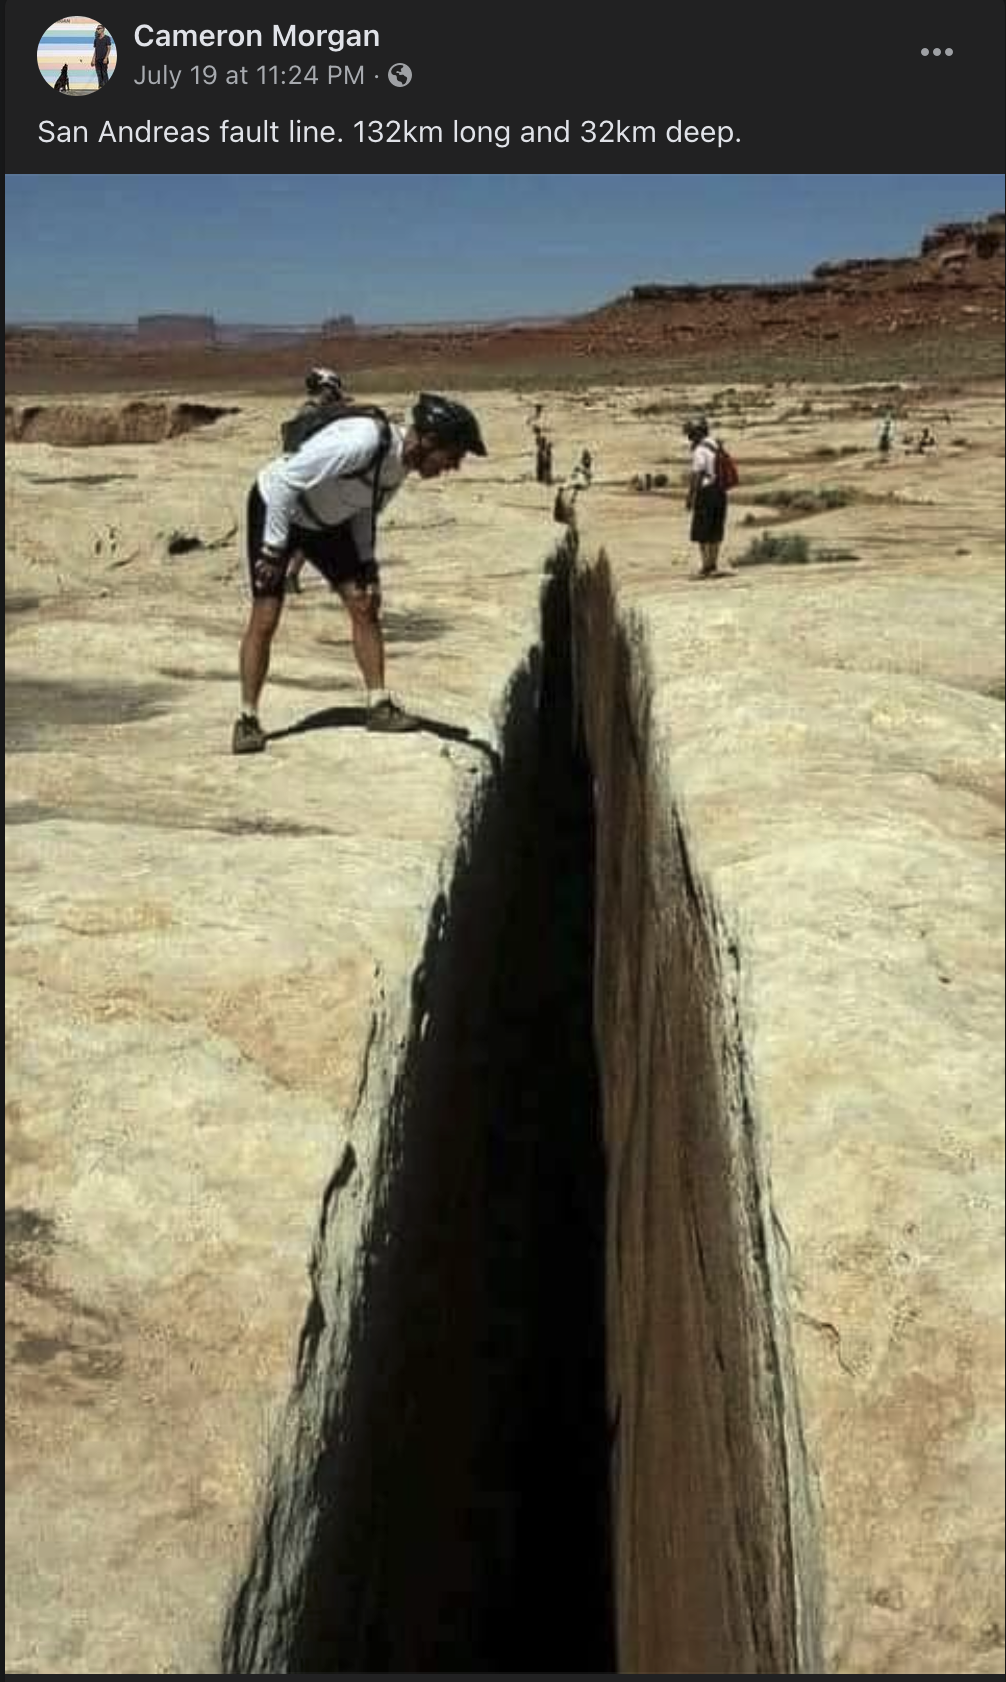 Fact Check Photo Does NOT Show The San Andreas Fault Lead Stories